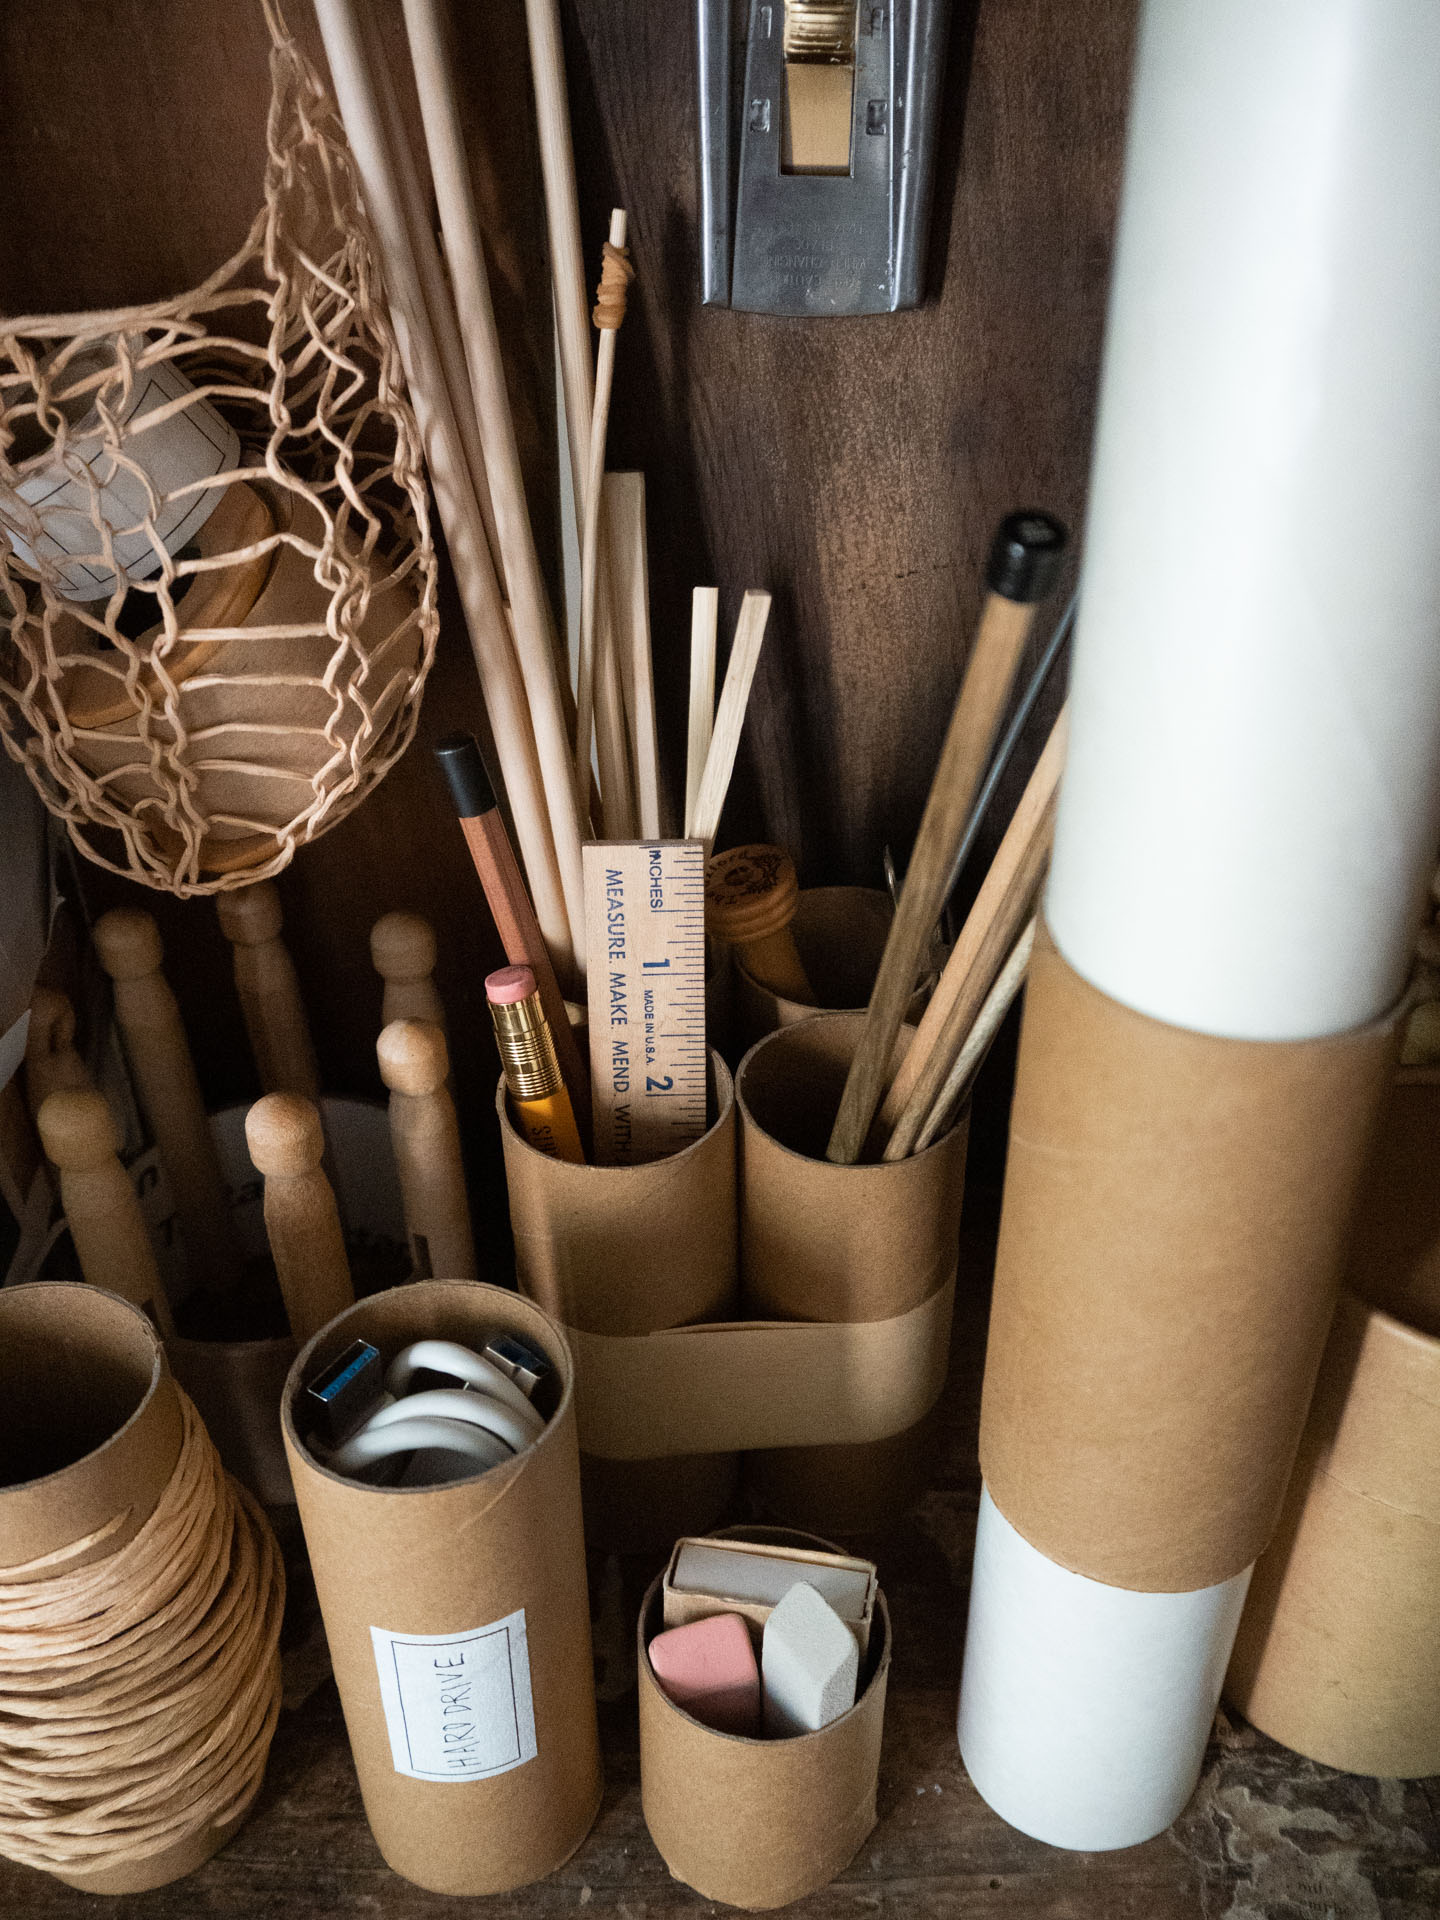 The Many Uses of Cardboard Tubes